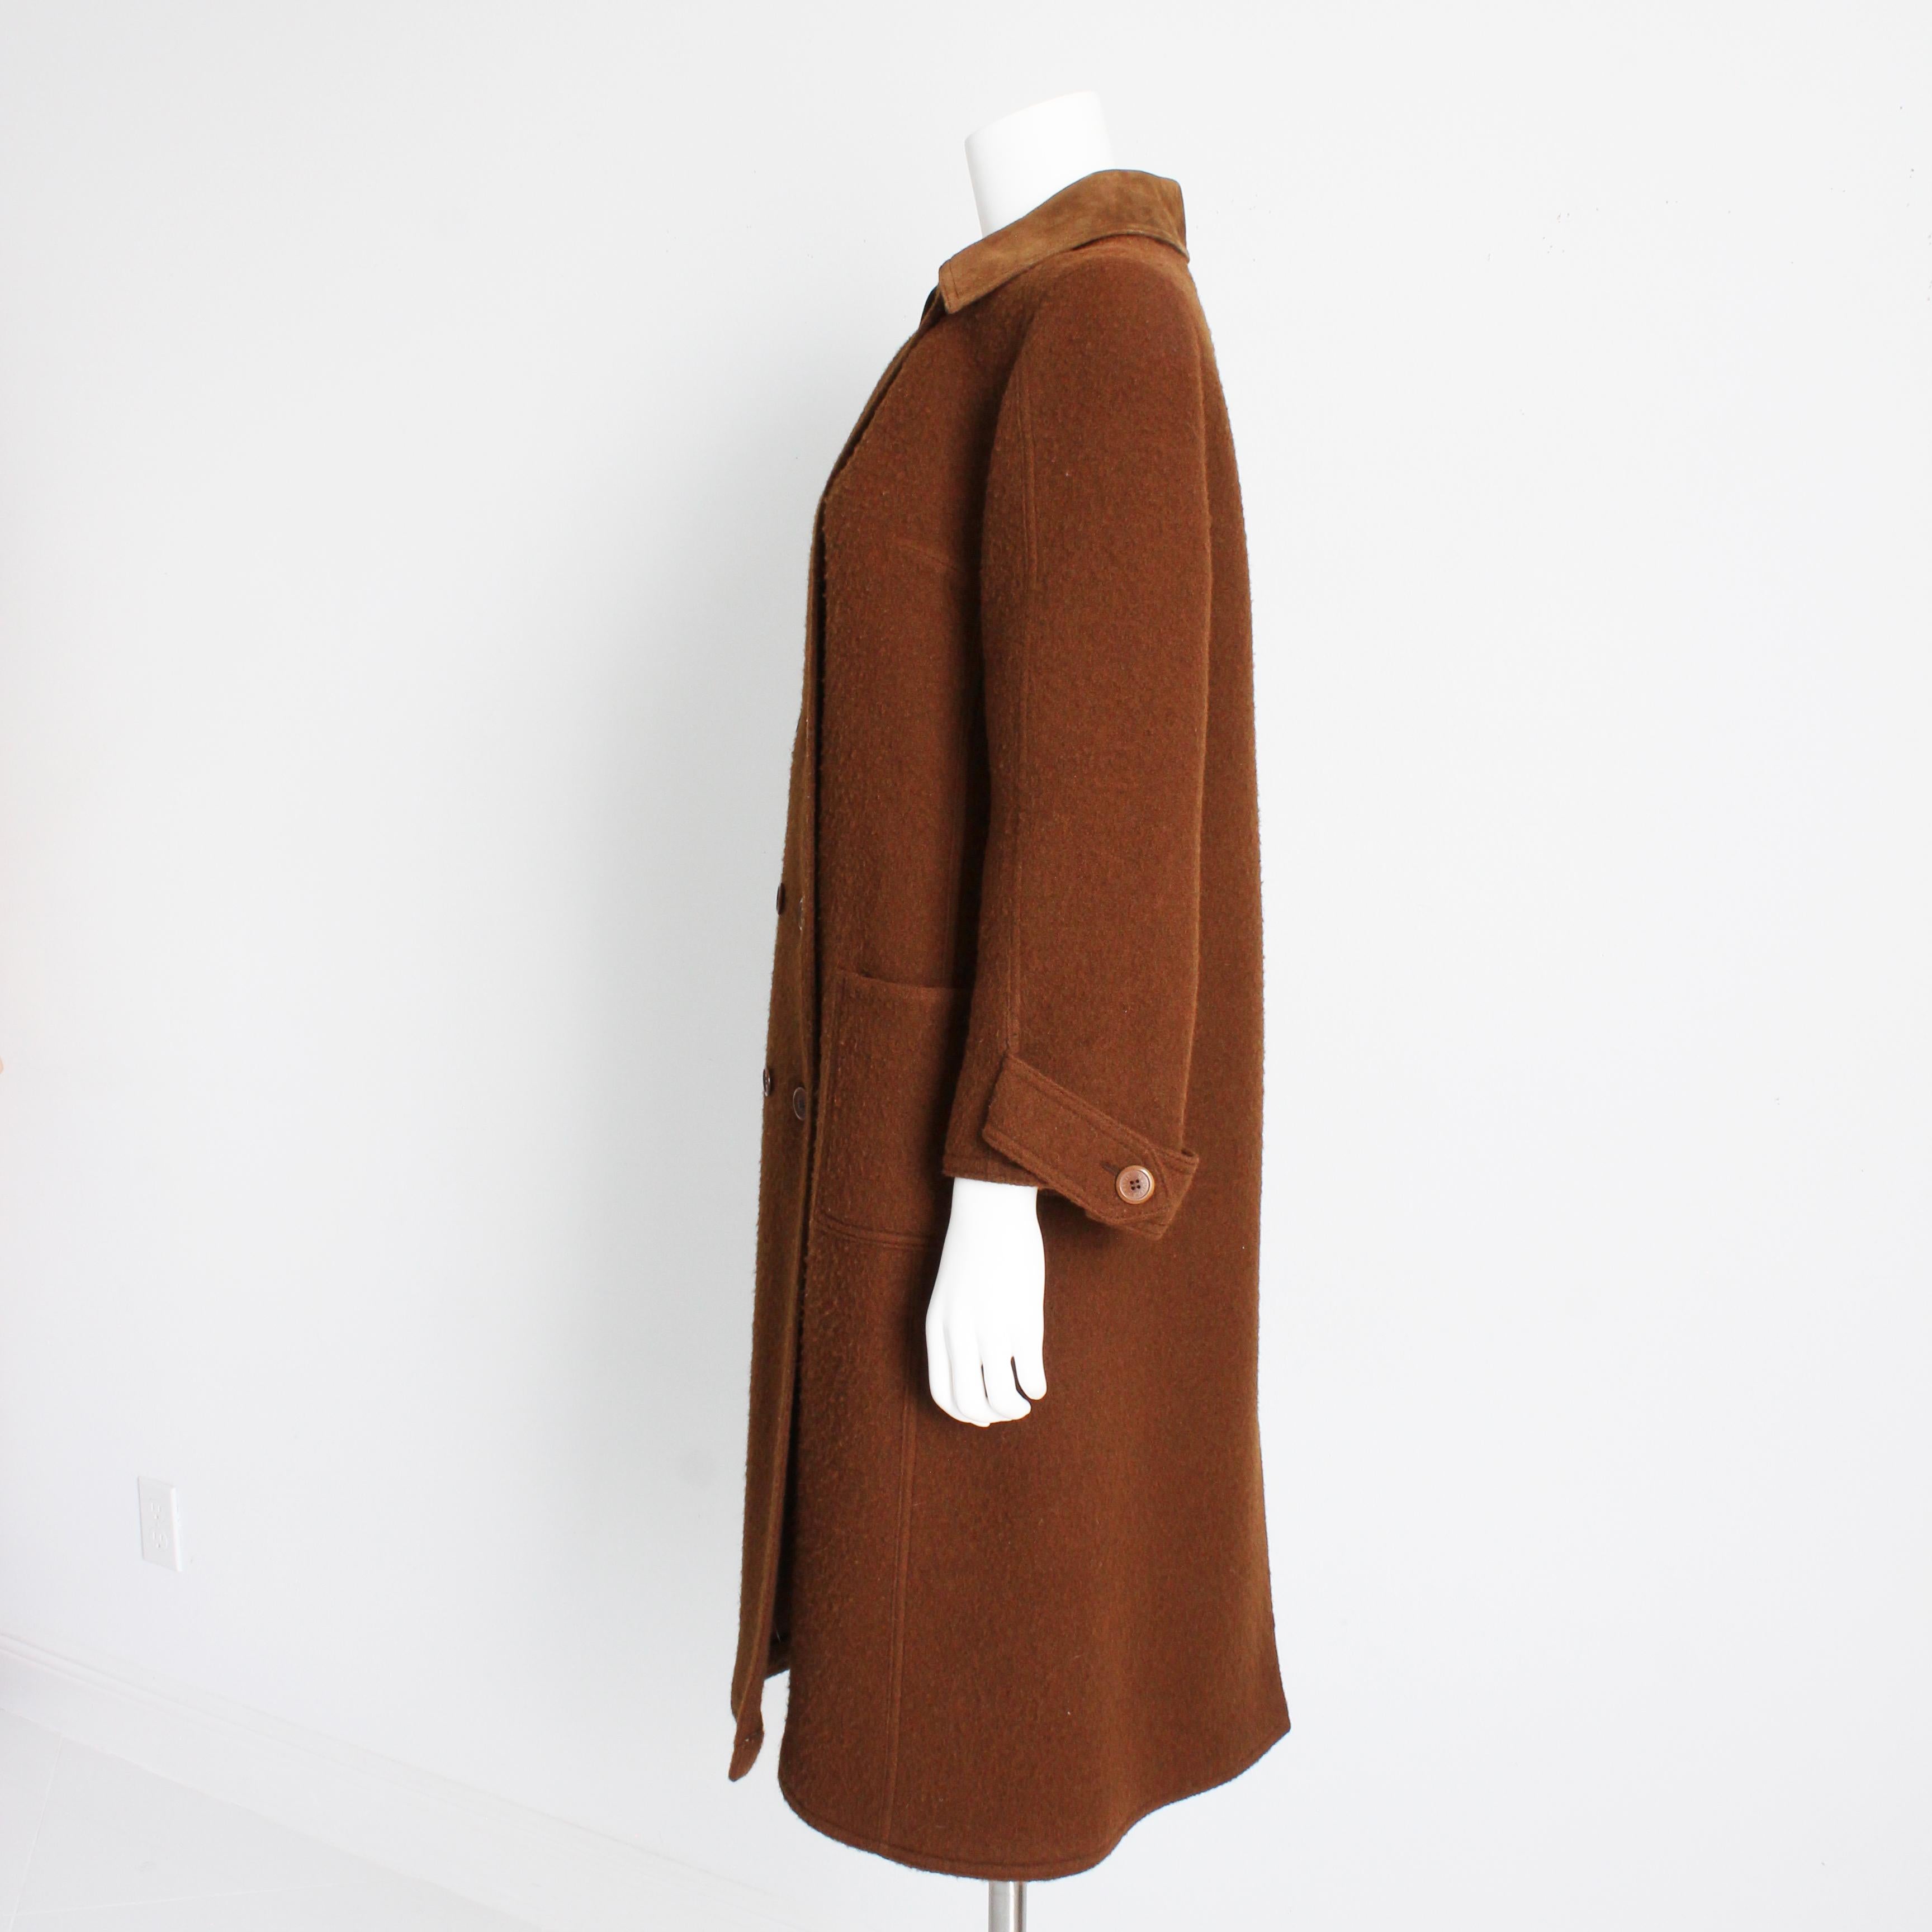 Hermes Brown Double Breasted Suede Leather Trim Trench Style Wool Coat, 1970s For Sale 4